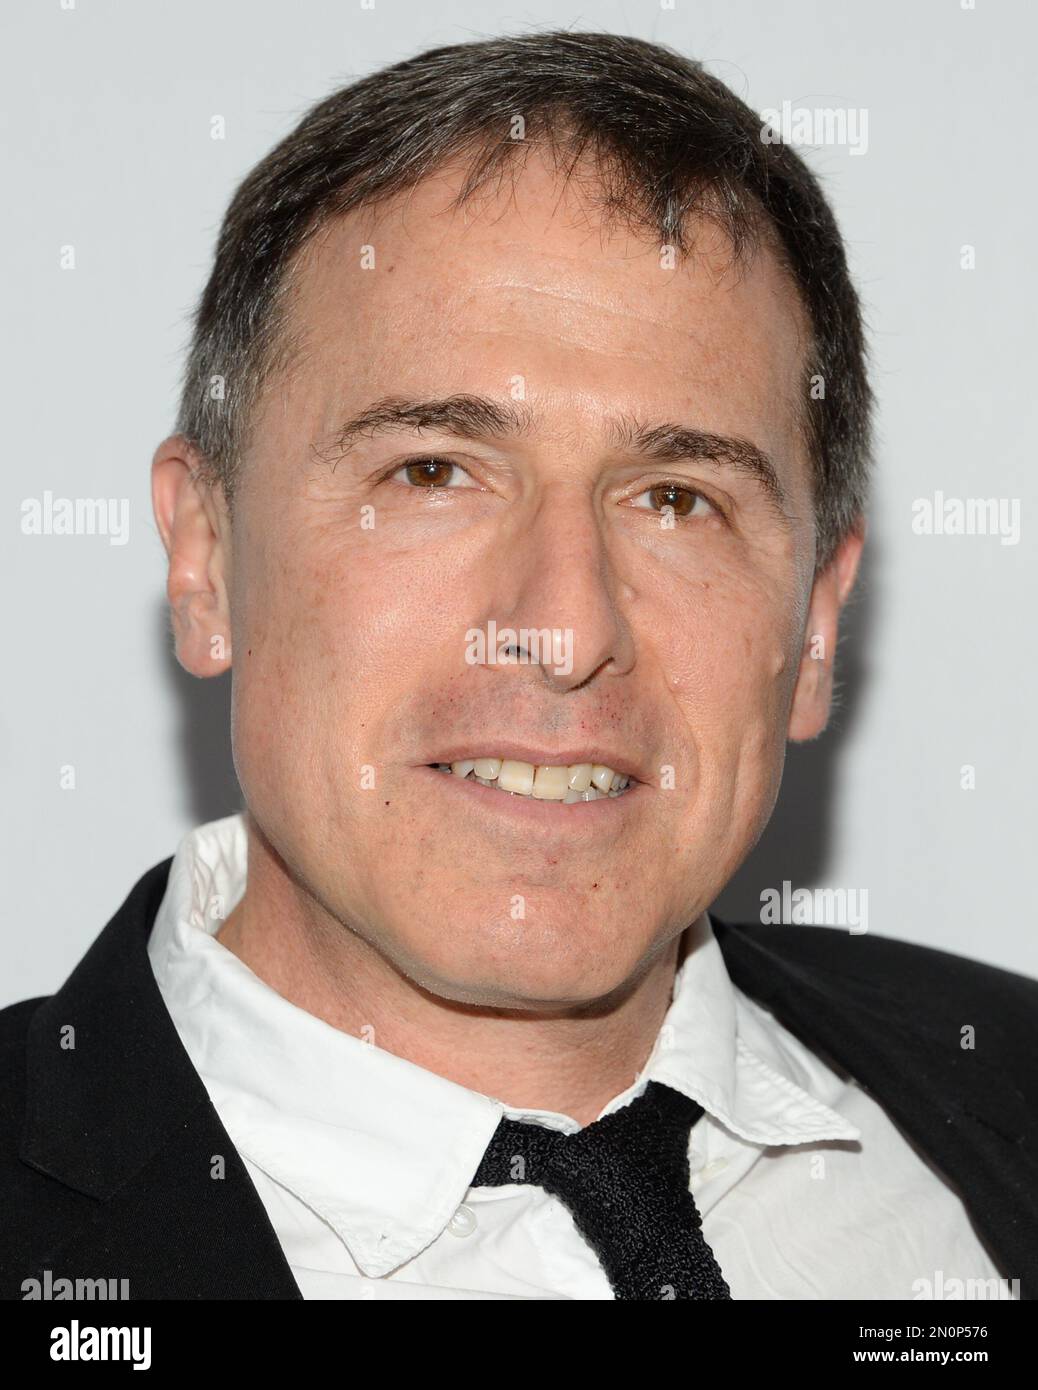 David O Russell Attends The World Premiere Of Joy At The Ziegfeld Theatre On Sunday Dec 13 